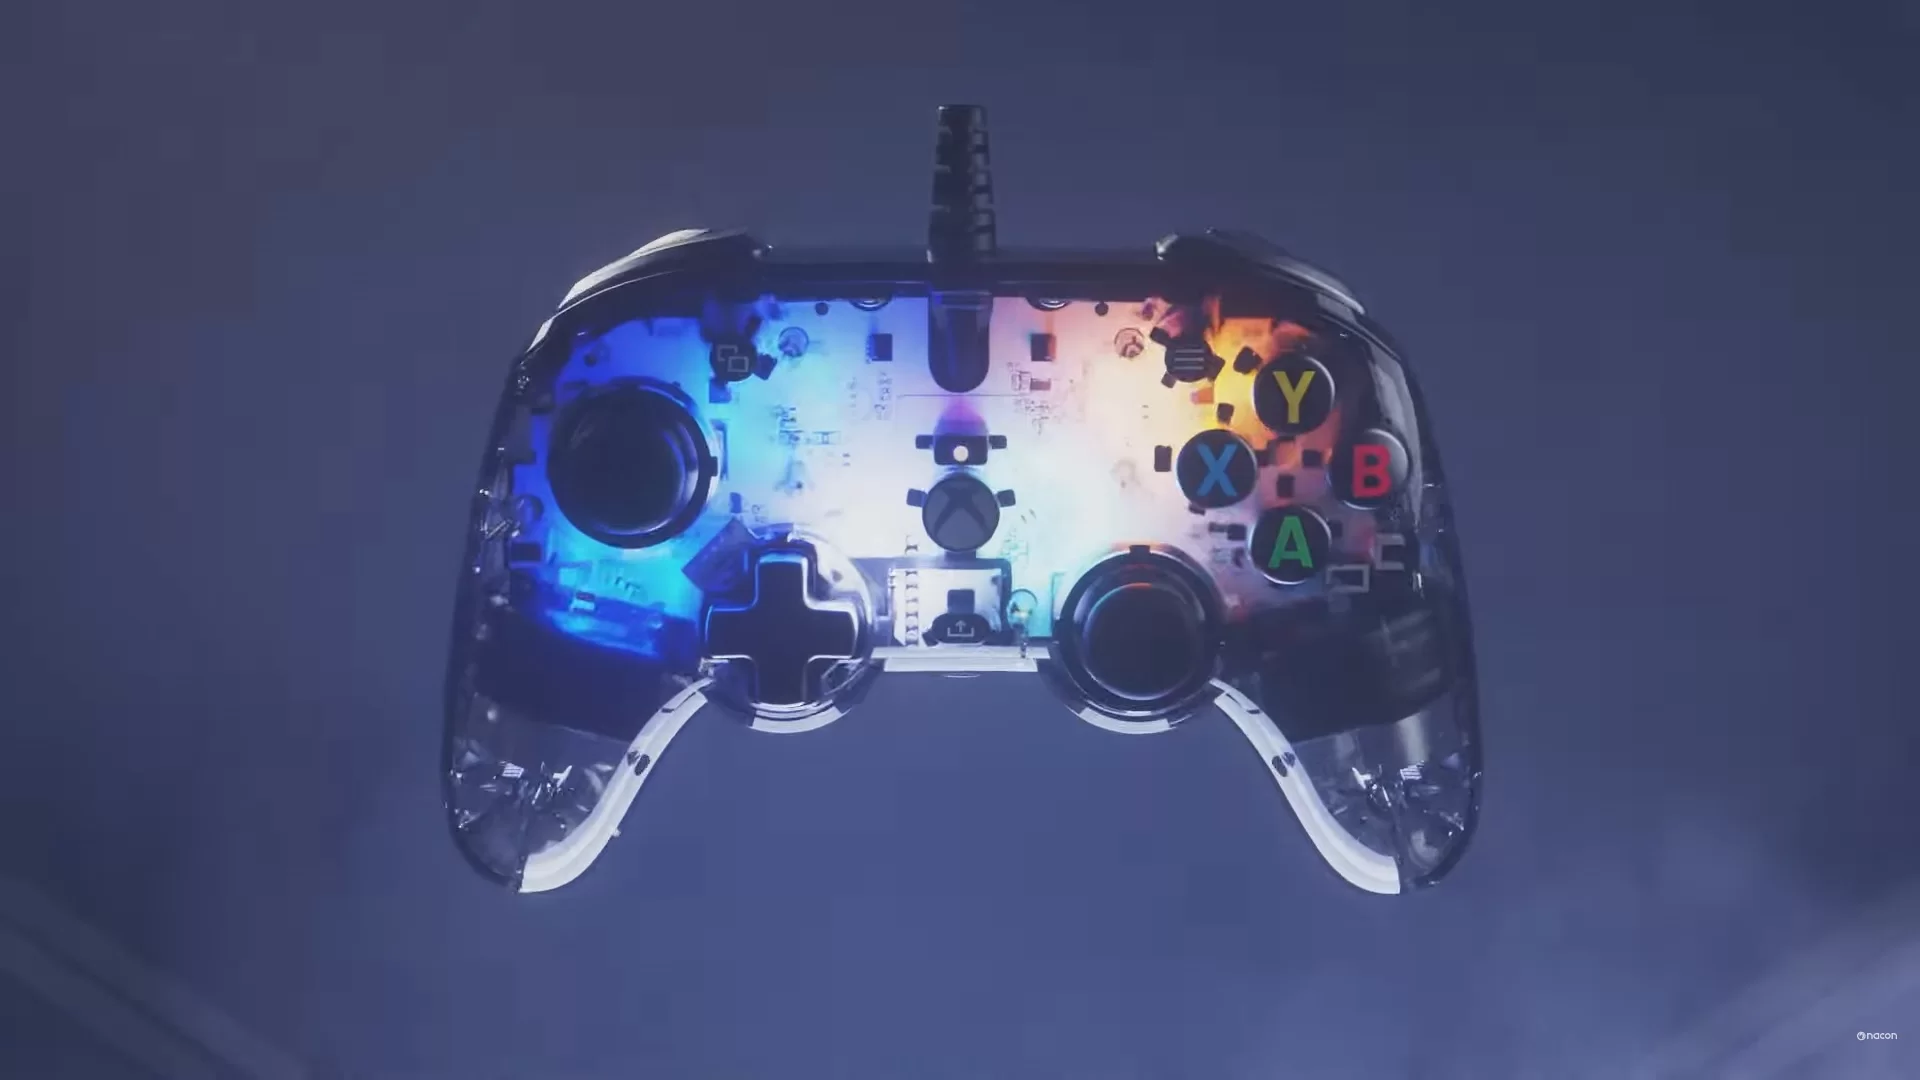 NACON: the new colors for the Pro Combact controller